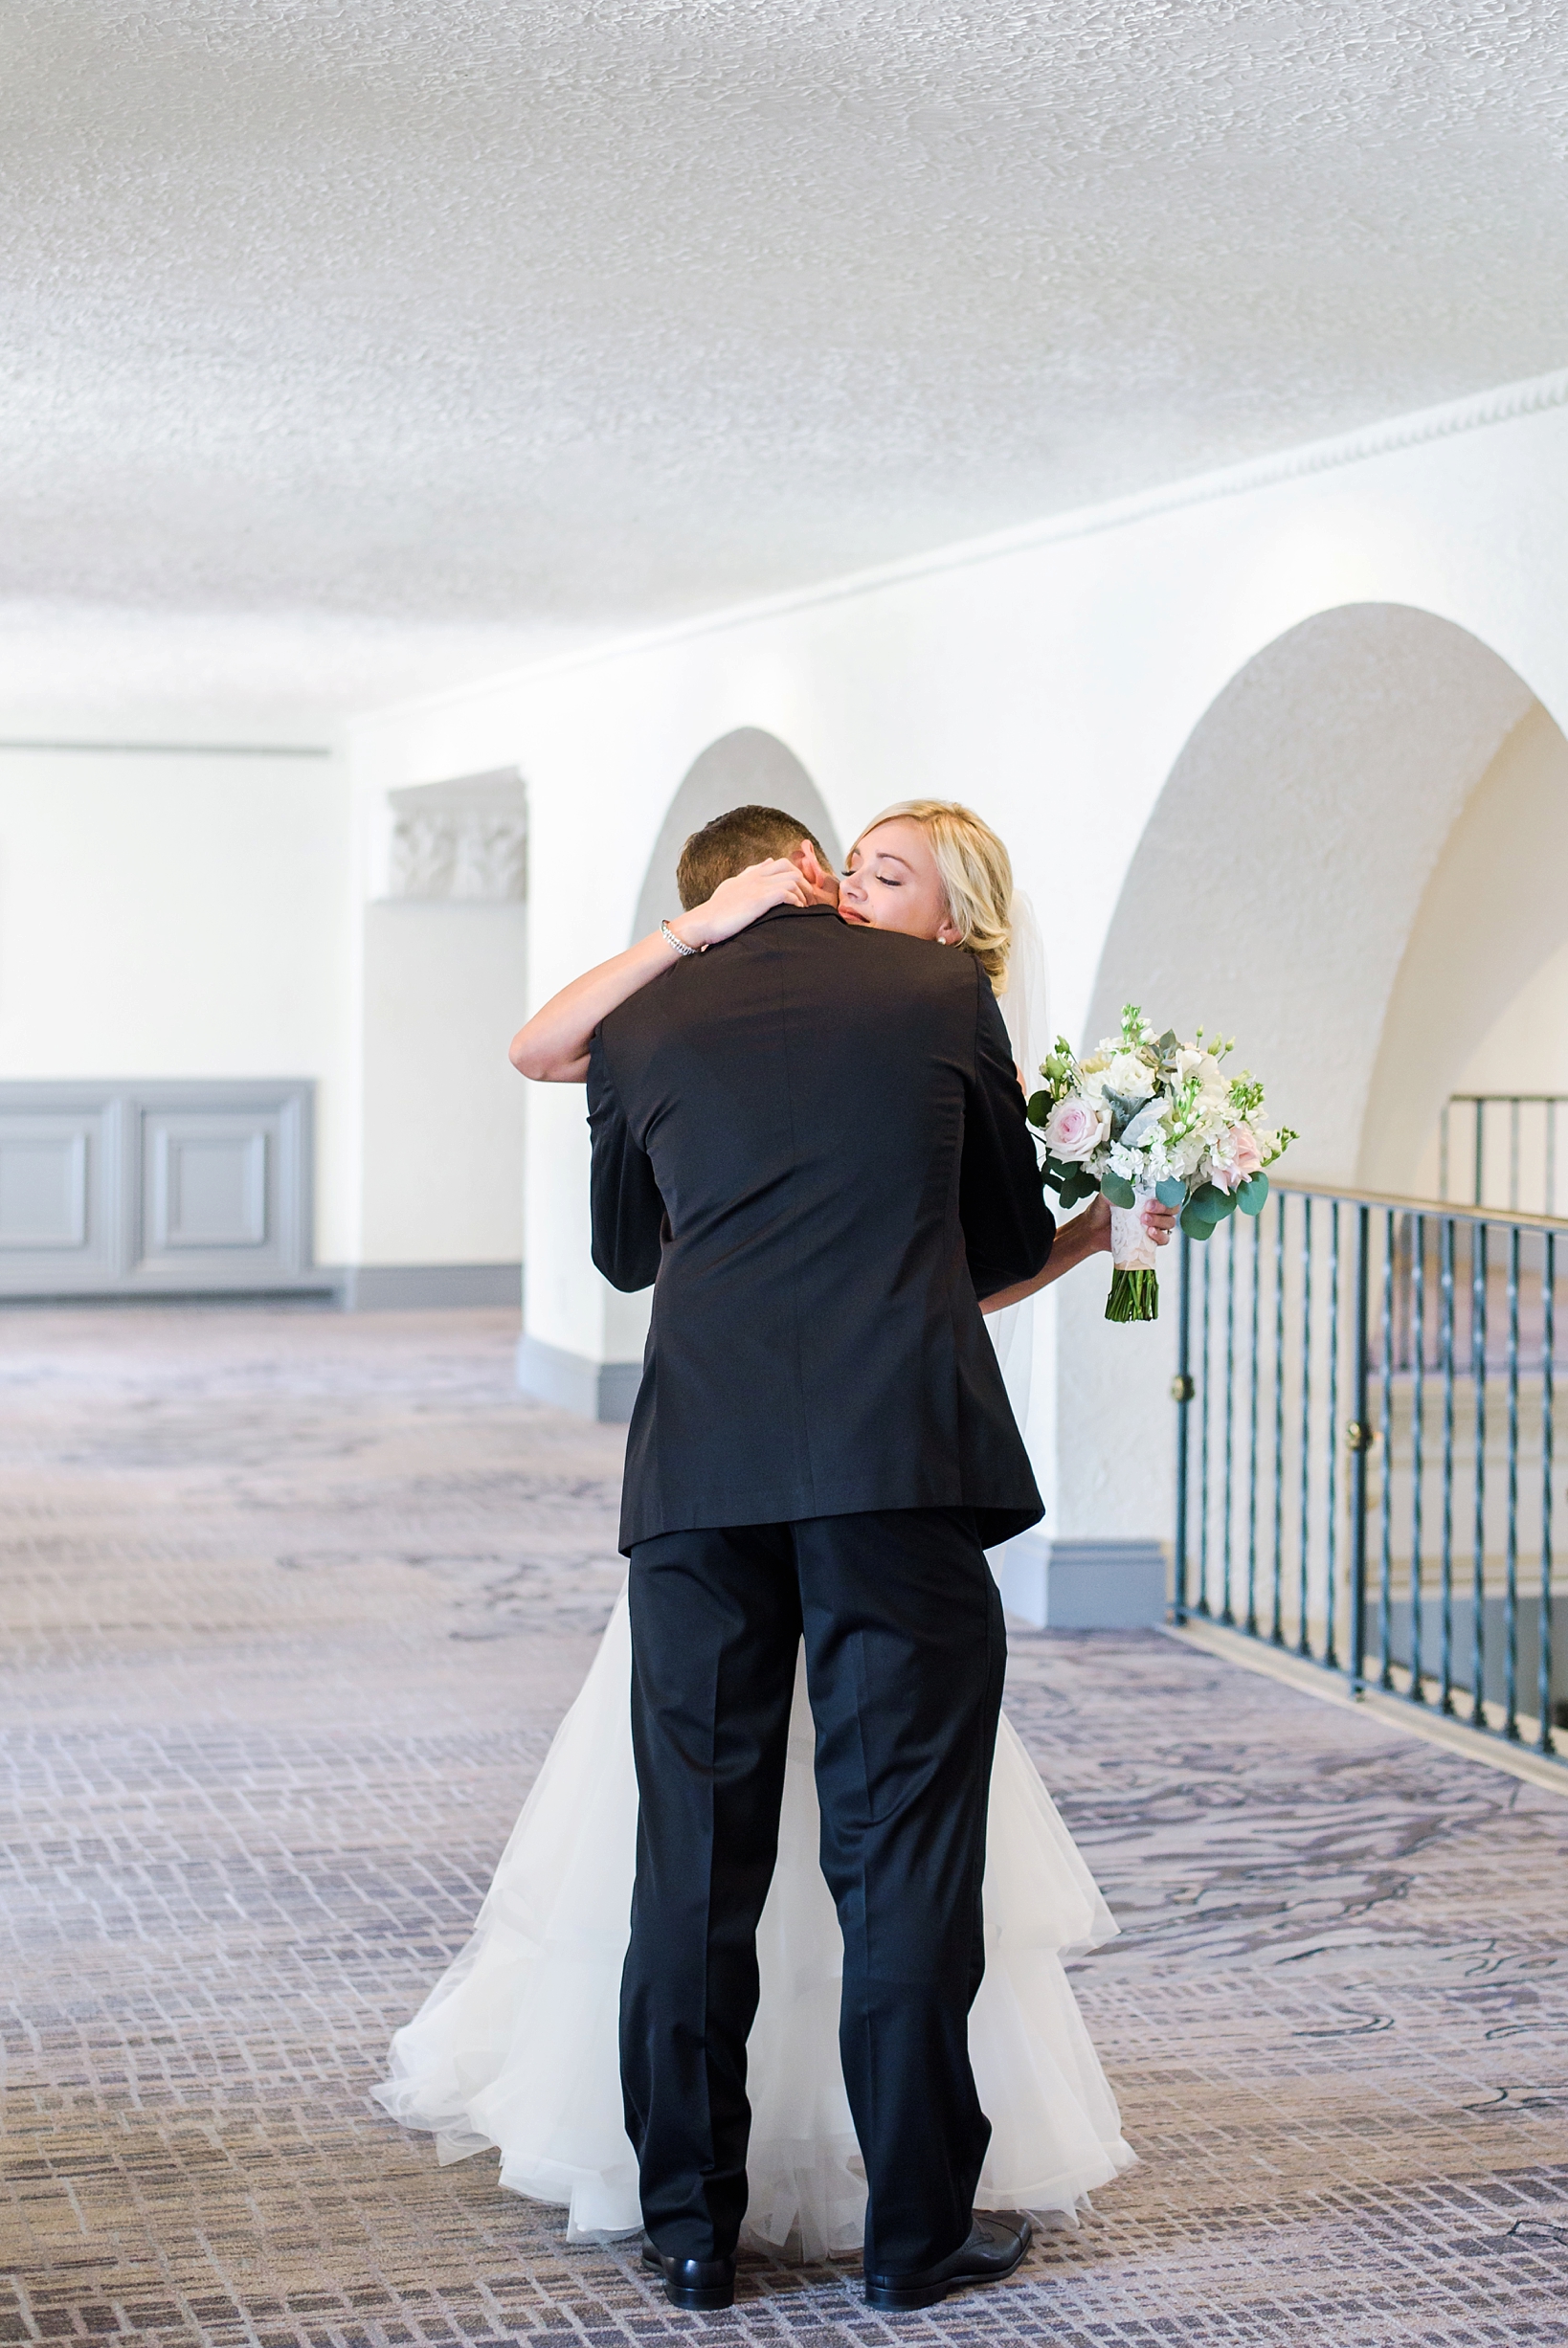 Bride and groom hug for the first time as they see each other on their wedding day.